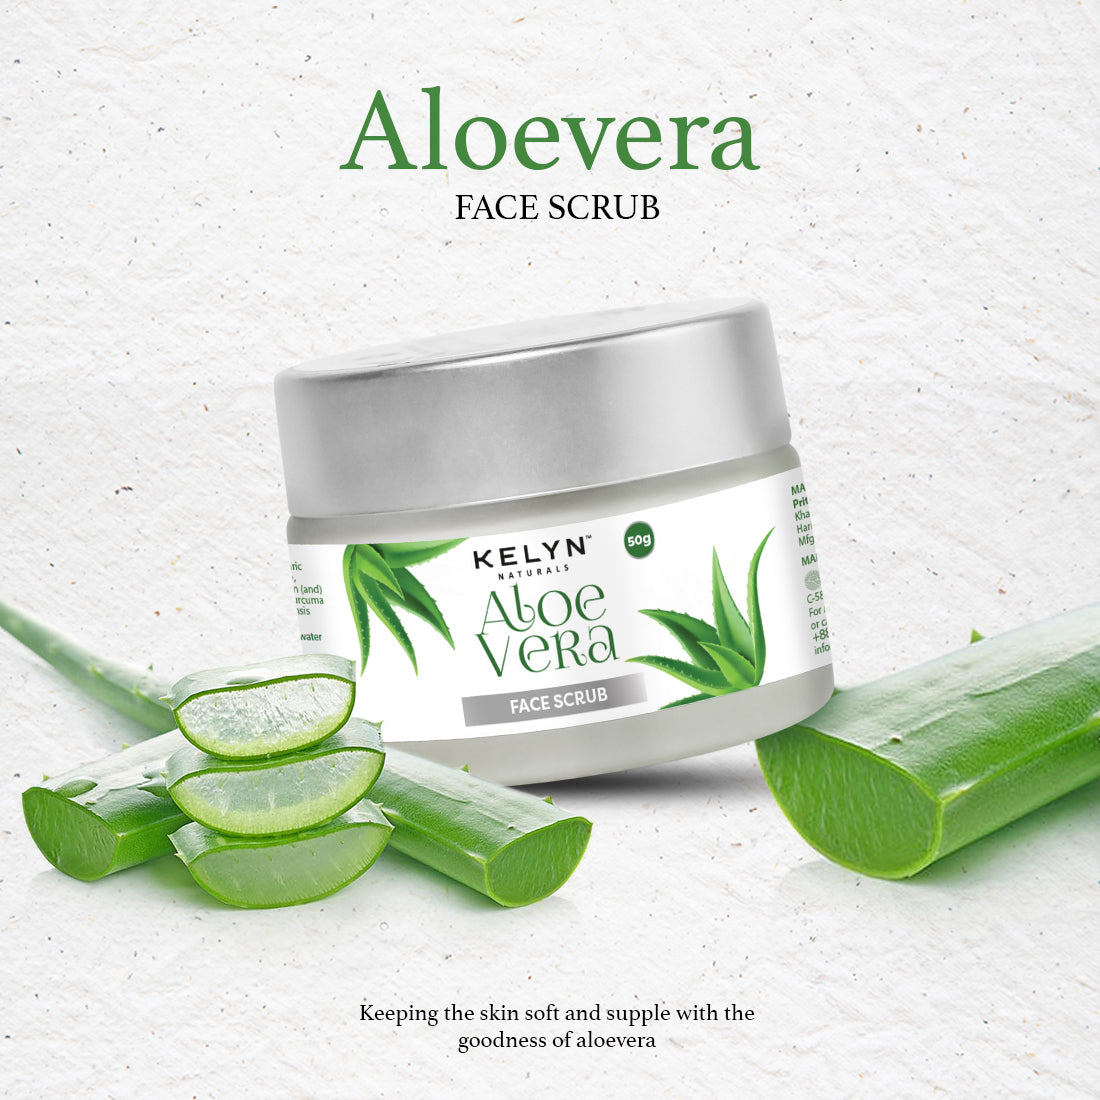 Aloe Vera Face Scrub with Natural Extracts – 50g